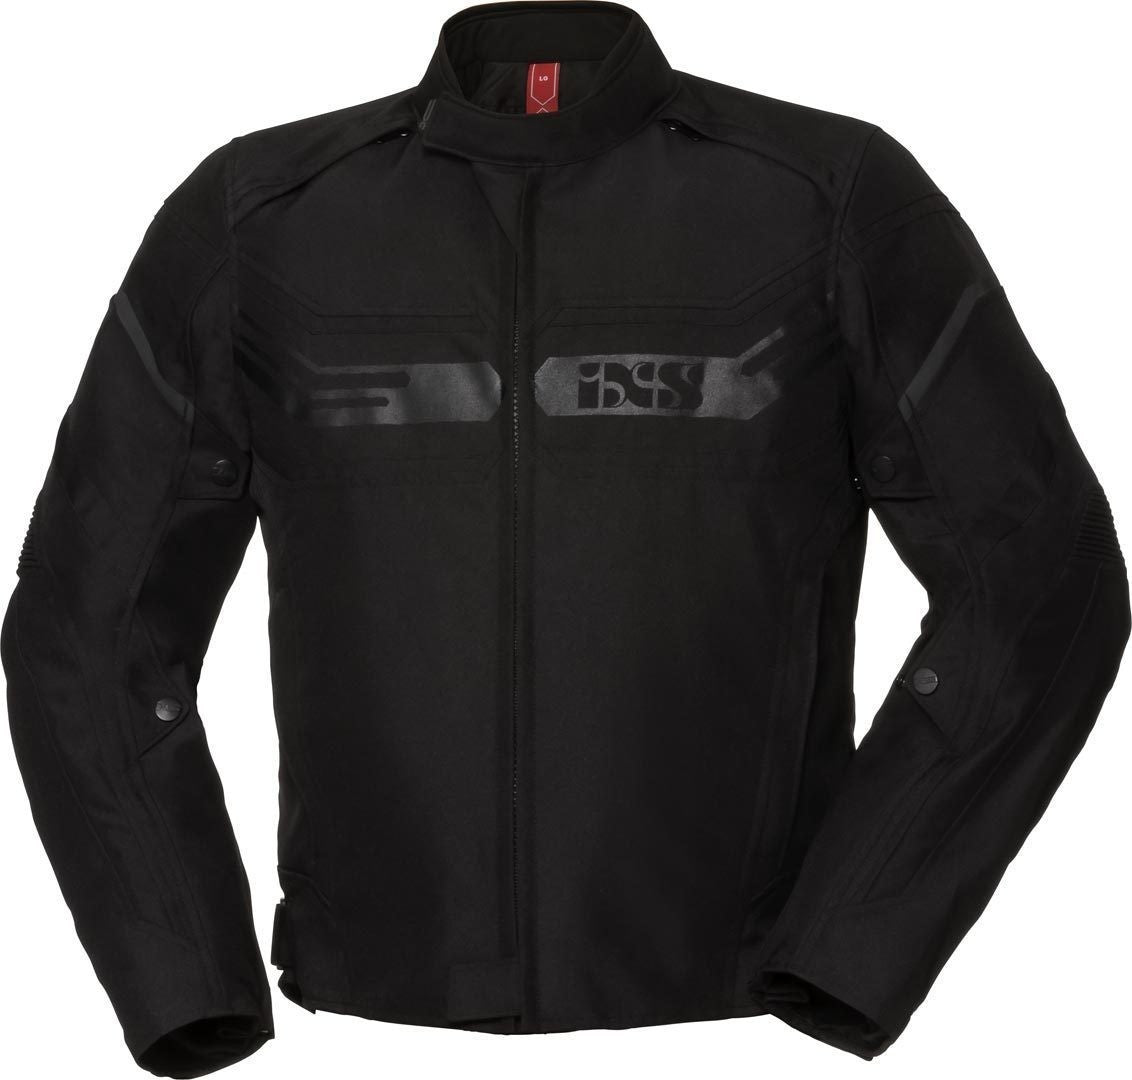 Ixs Winter Jacket Rs-400-St In Solto-Tex